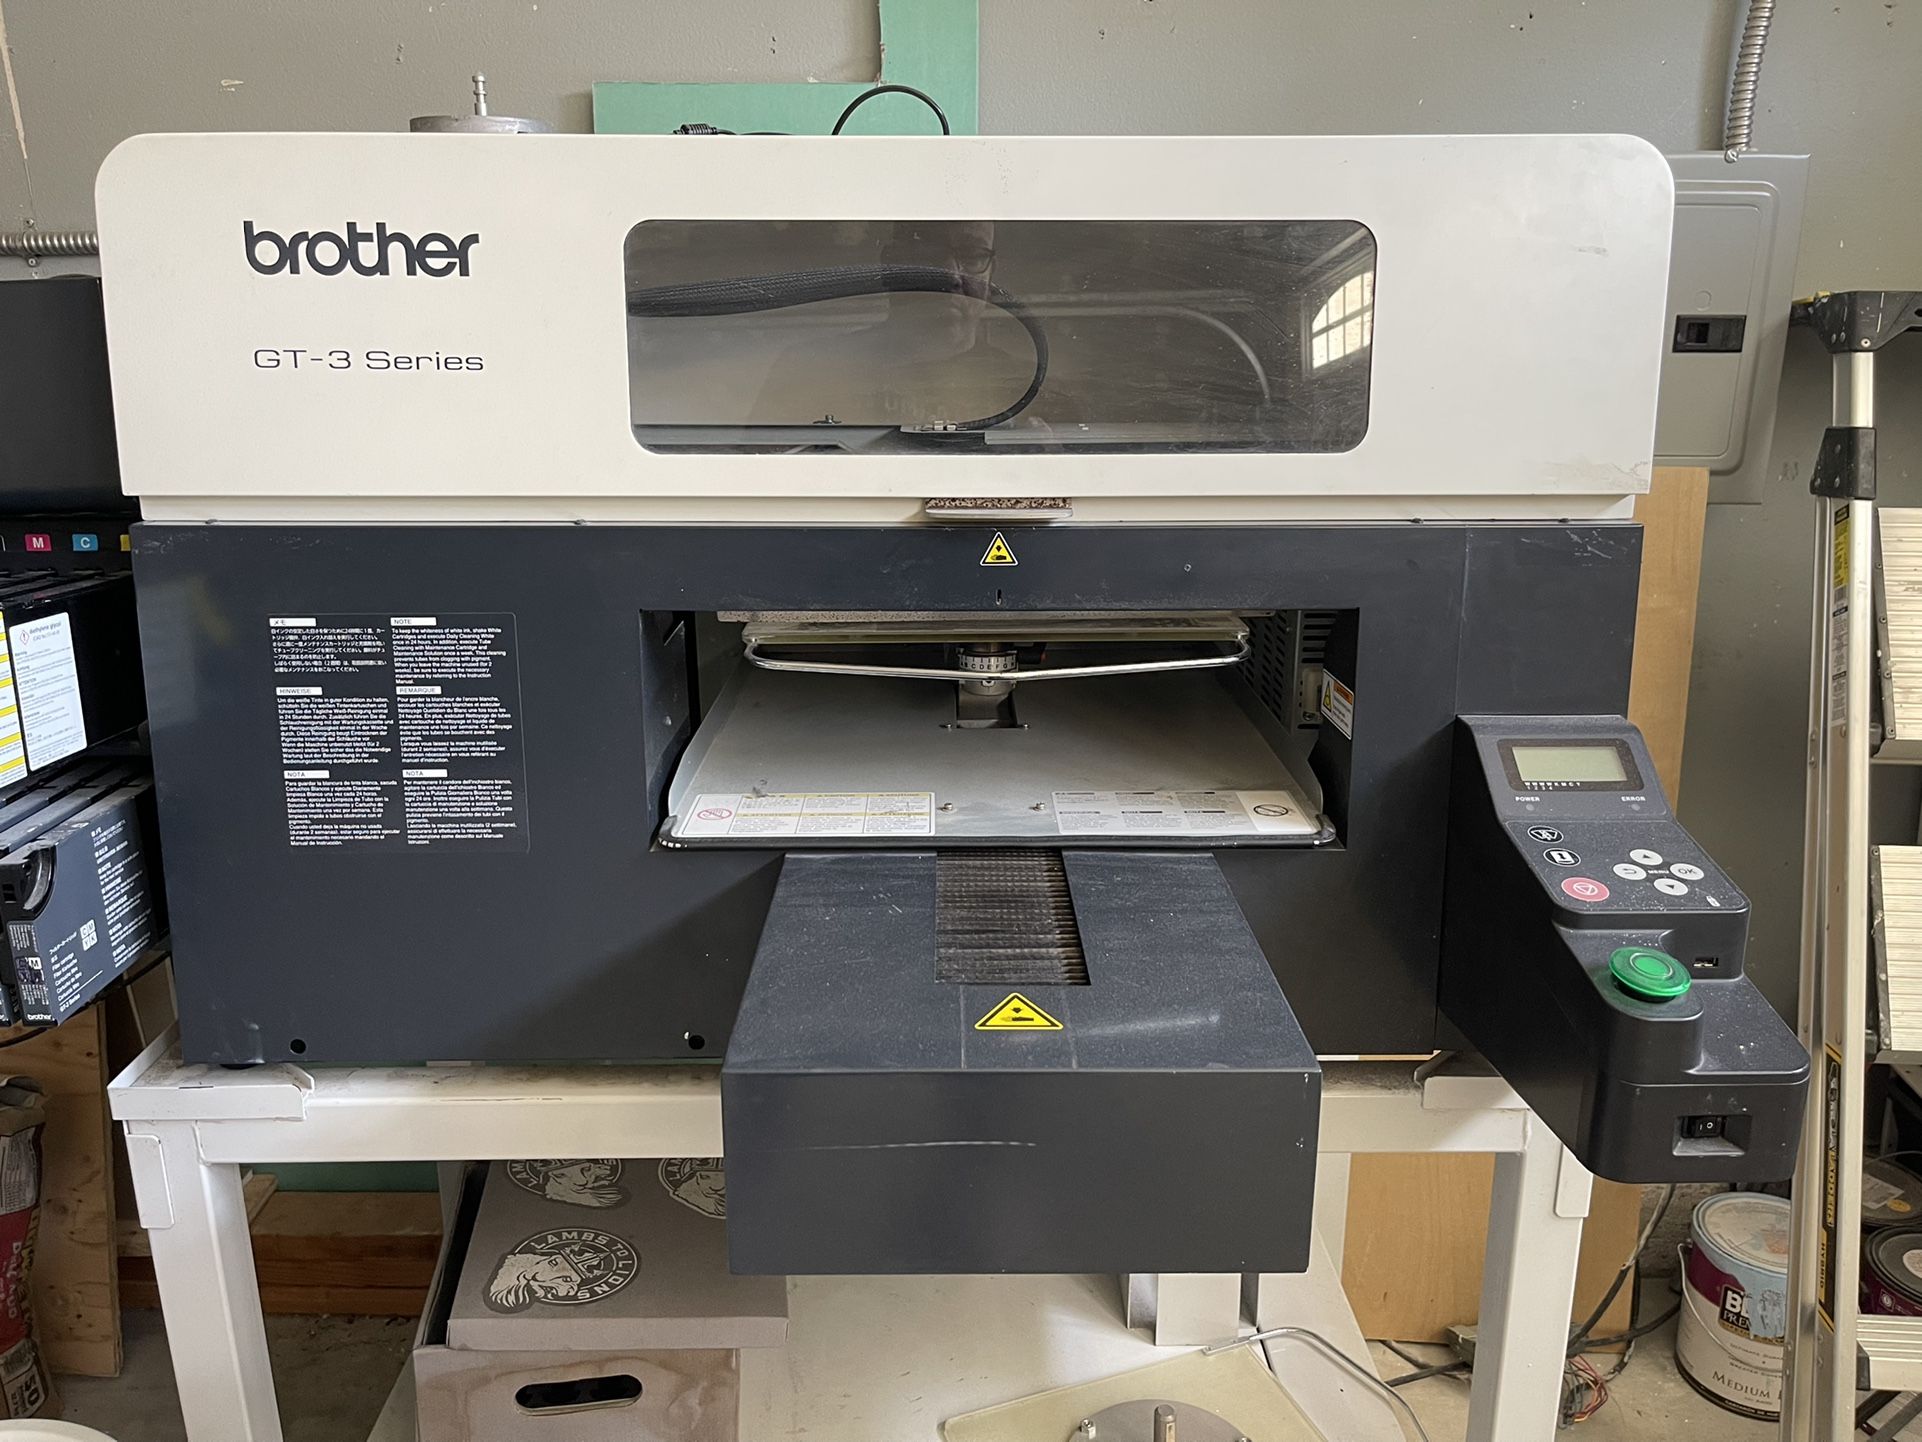 DTG (Direct to Garment) Printer / Brother GT-381